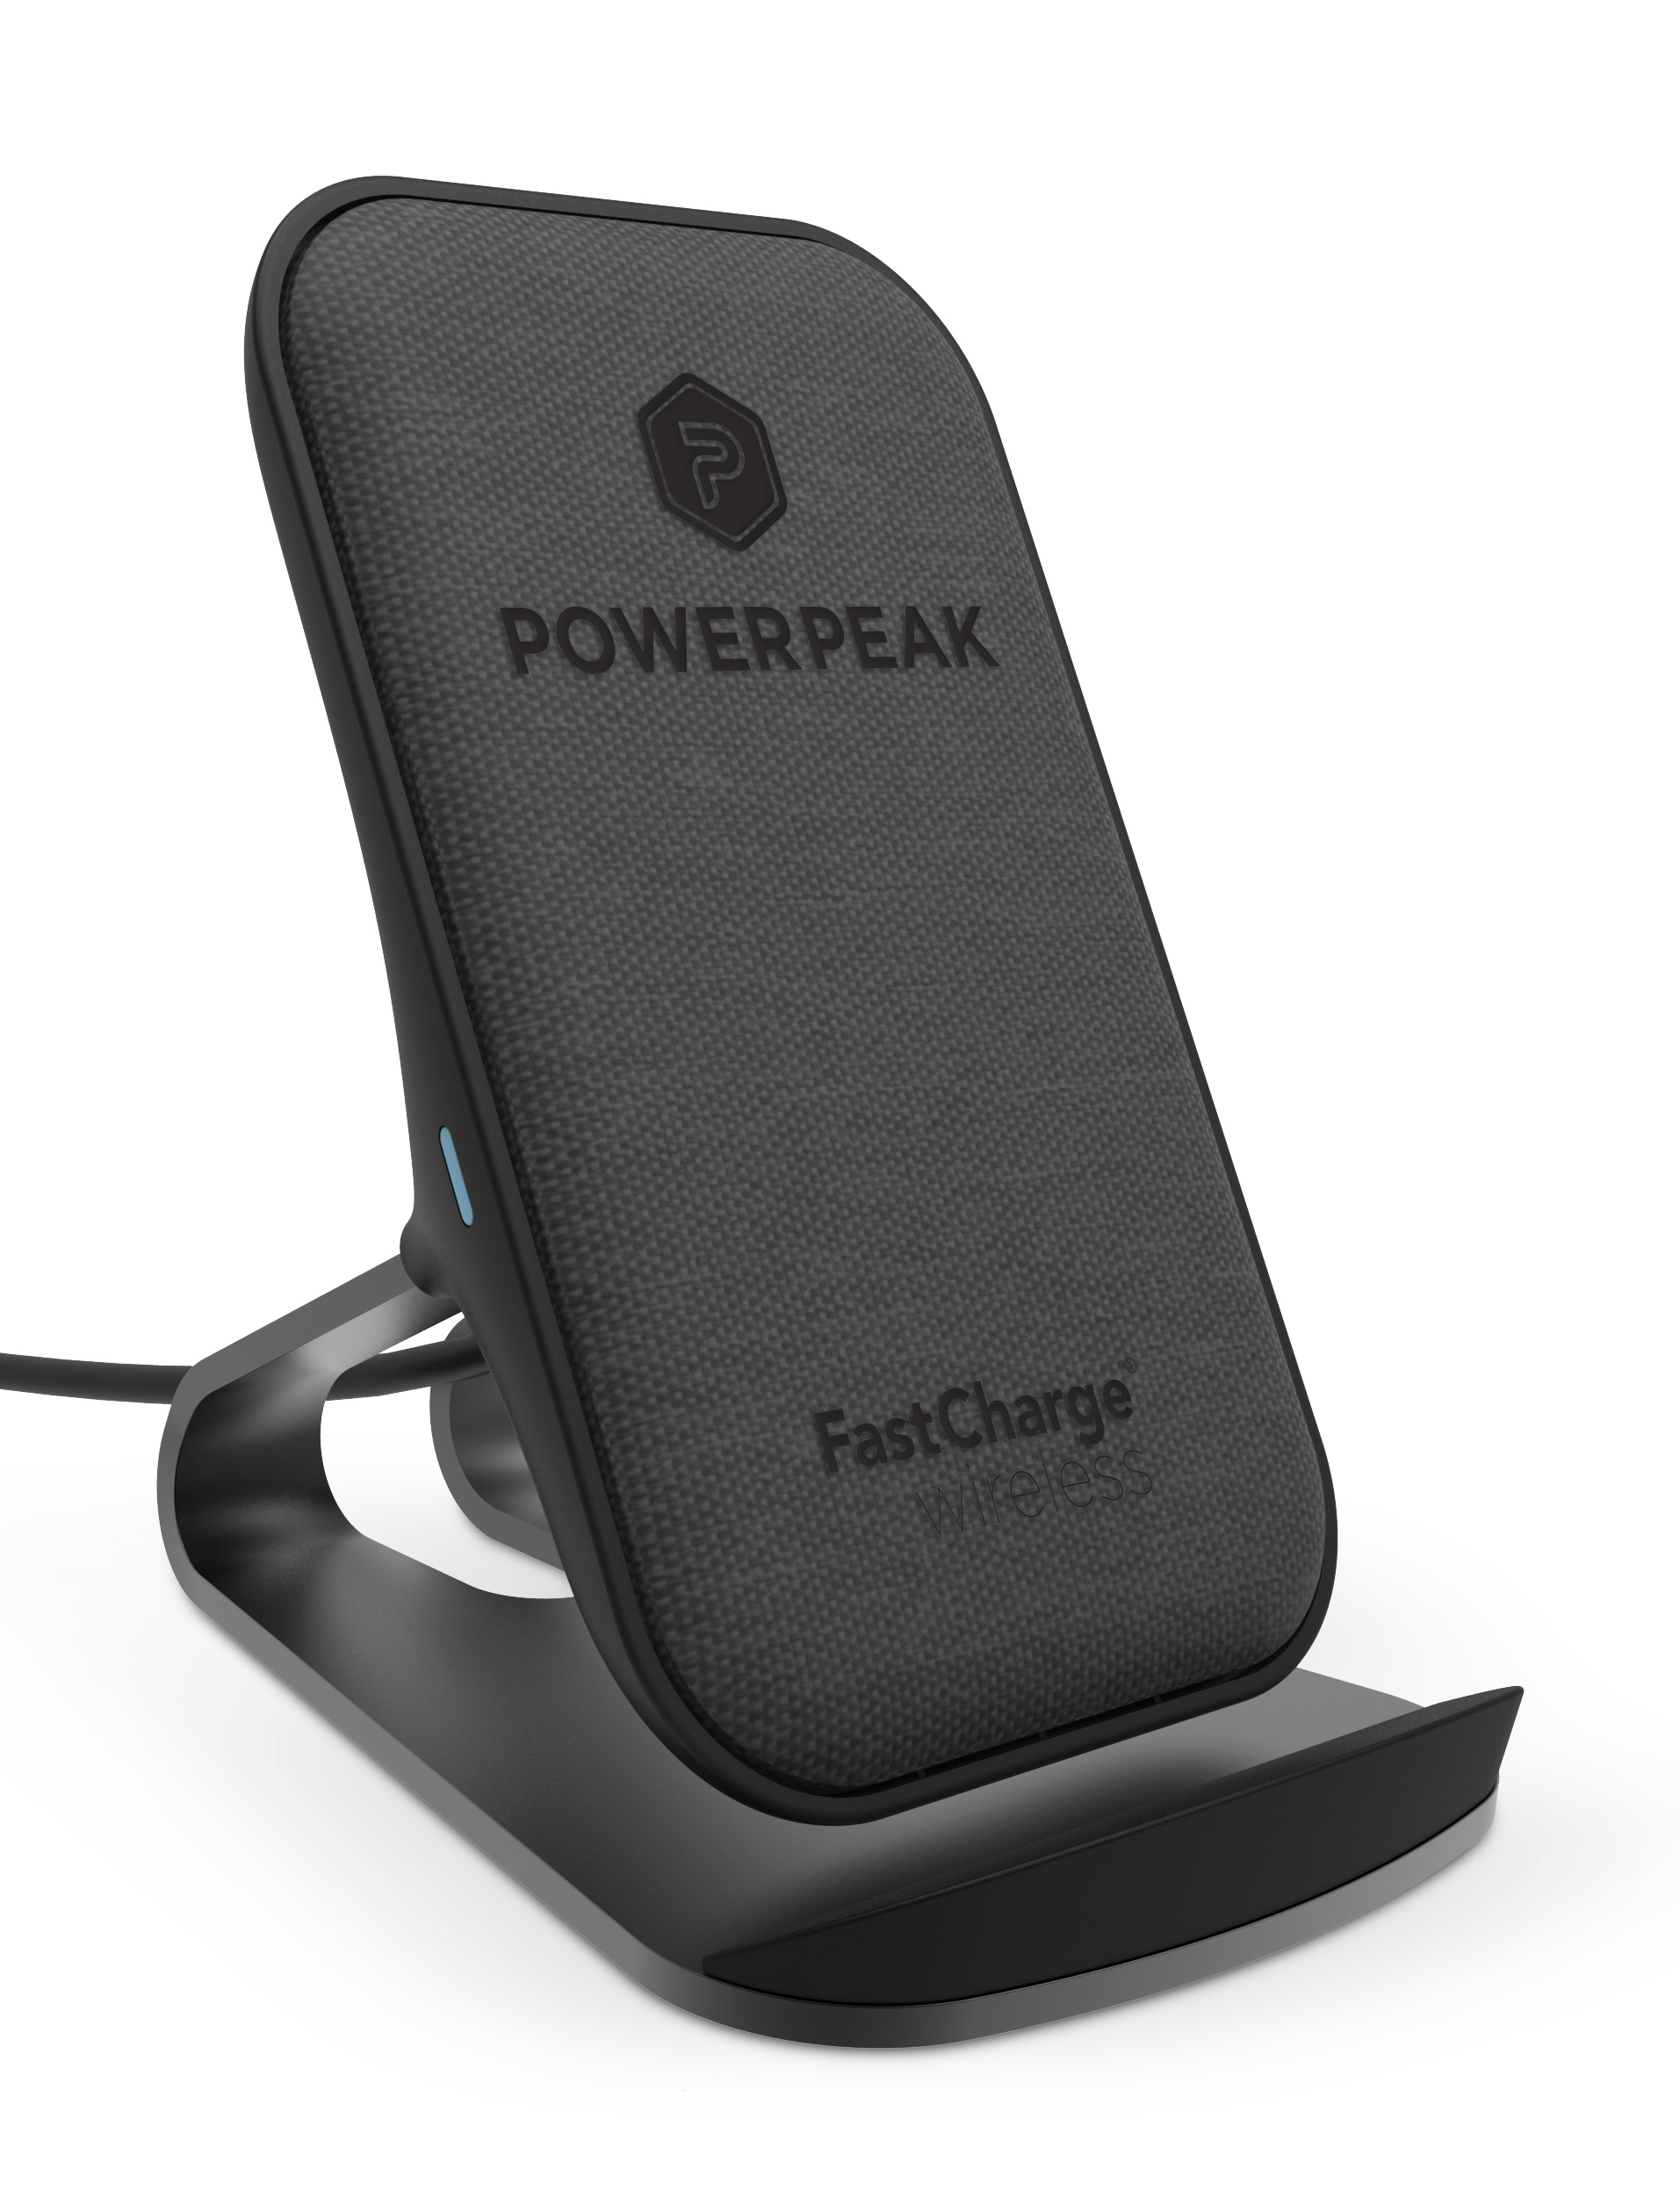 Fast Charge Aluminum Wireless Charging Stand for Qi-Compatible Devices in both vertical and horizontal positions